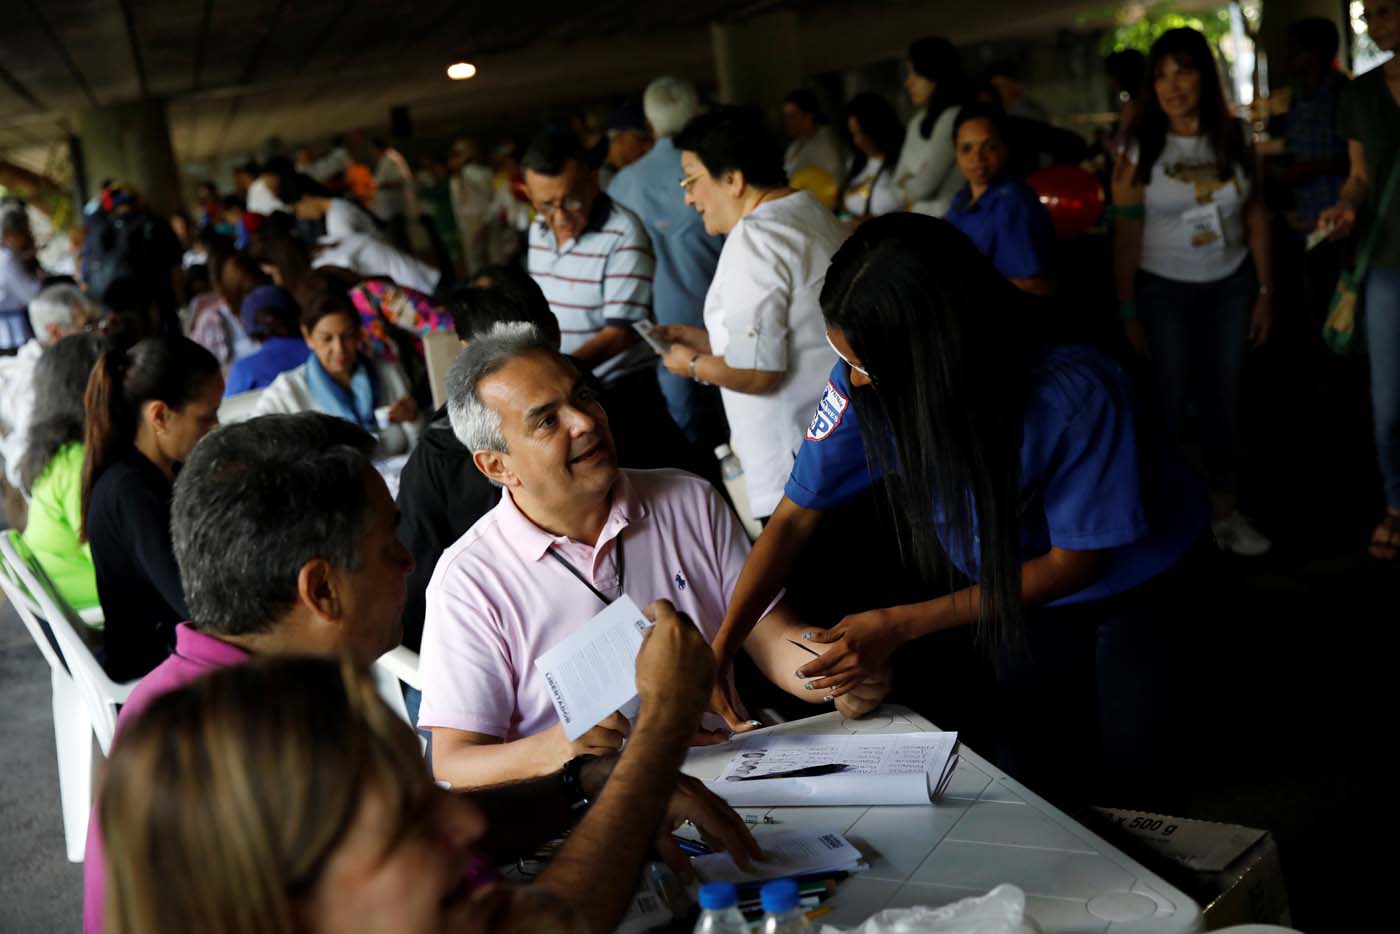 People sign in during an unofficial plebiscite against Venezuela's President Nicolas Maduro's government and his plan to rewrite the constitution, in Caracas, Venezuela July 16, 2017. REUTERS/Carlos Garcia Rawlins